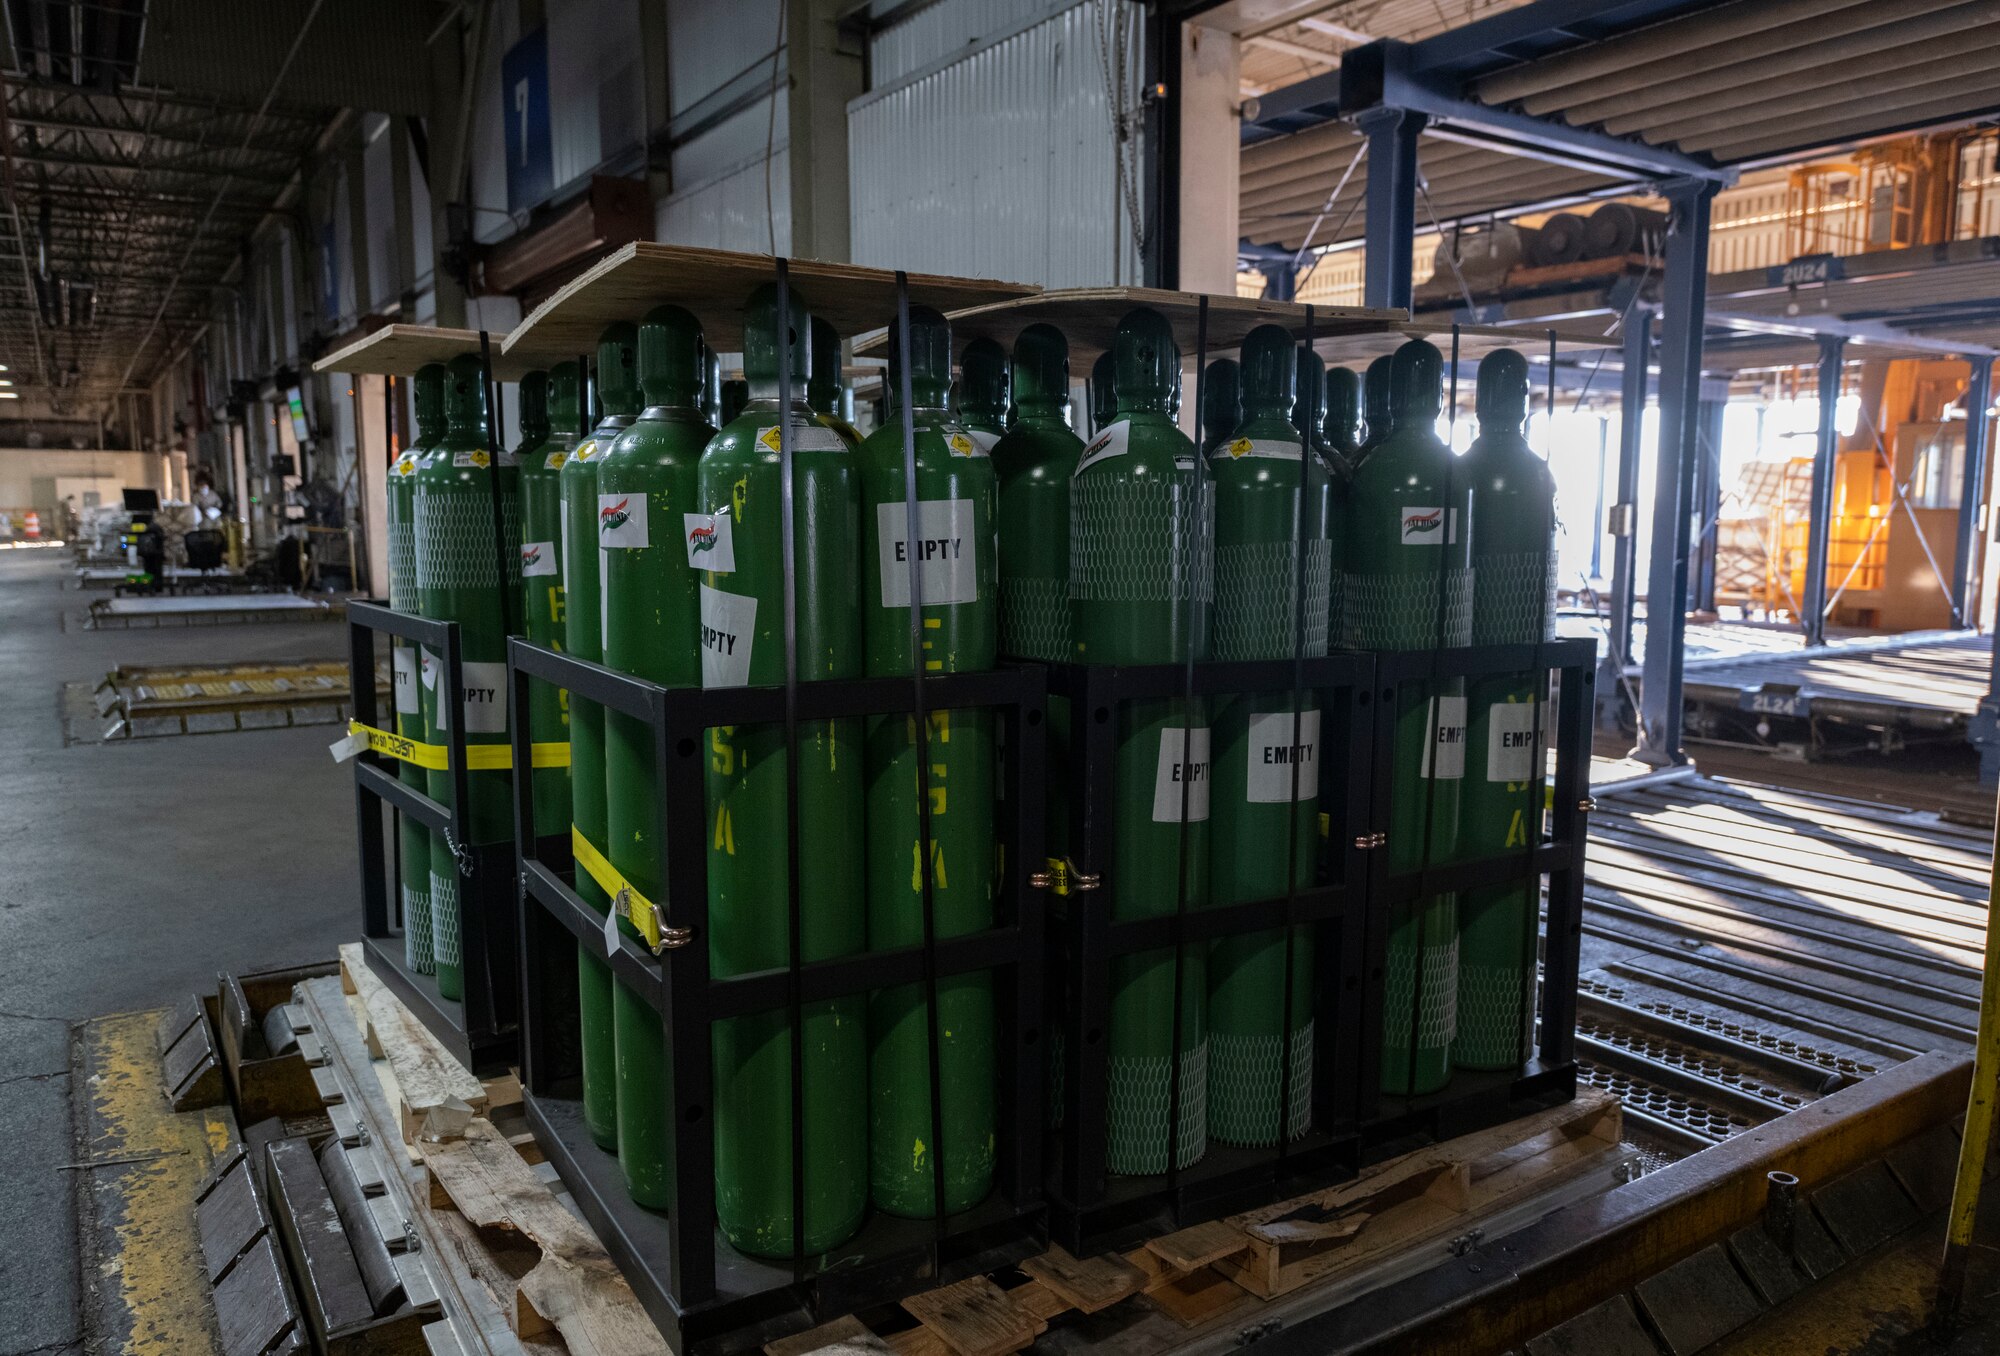 A pallet full of oxygen cylinders.